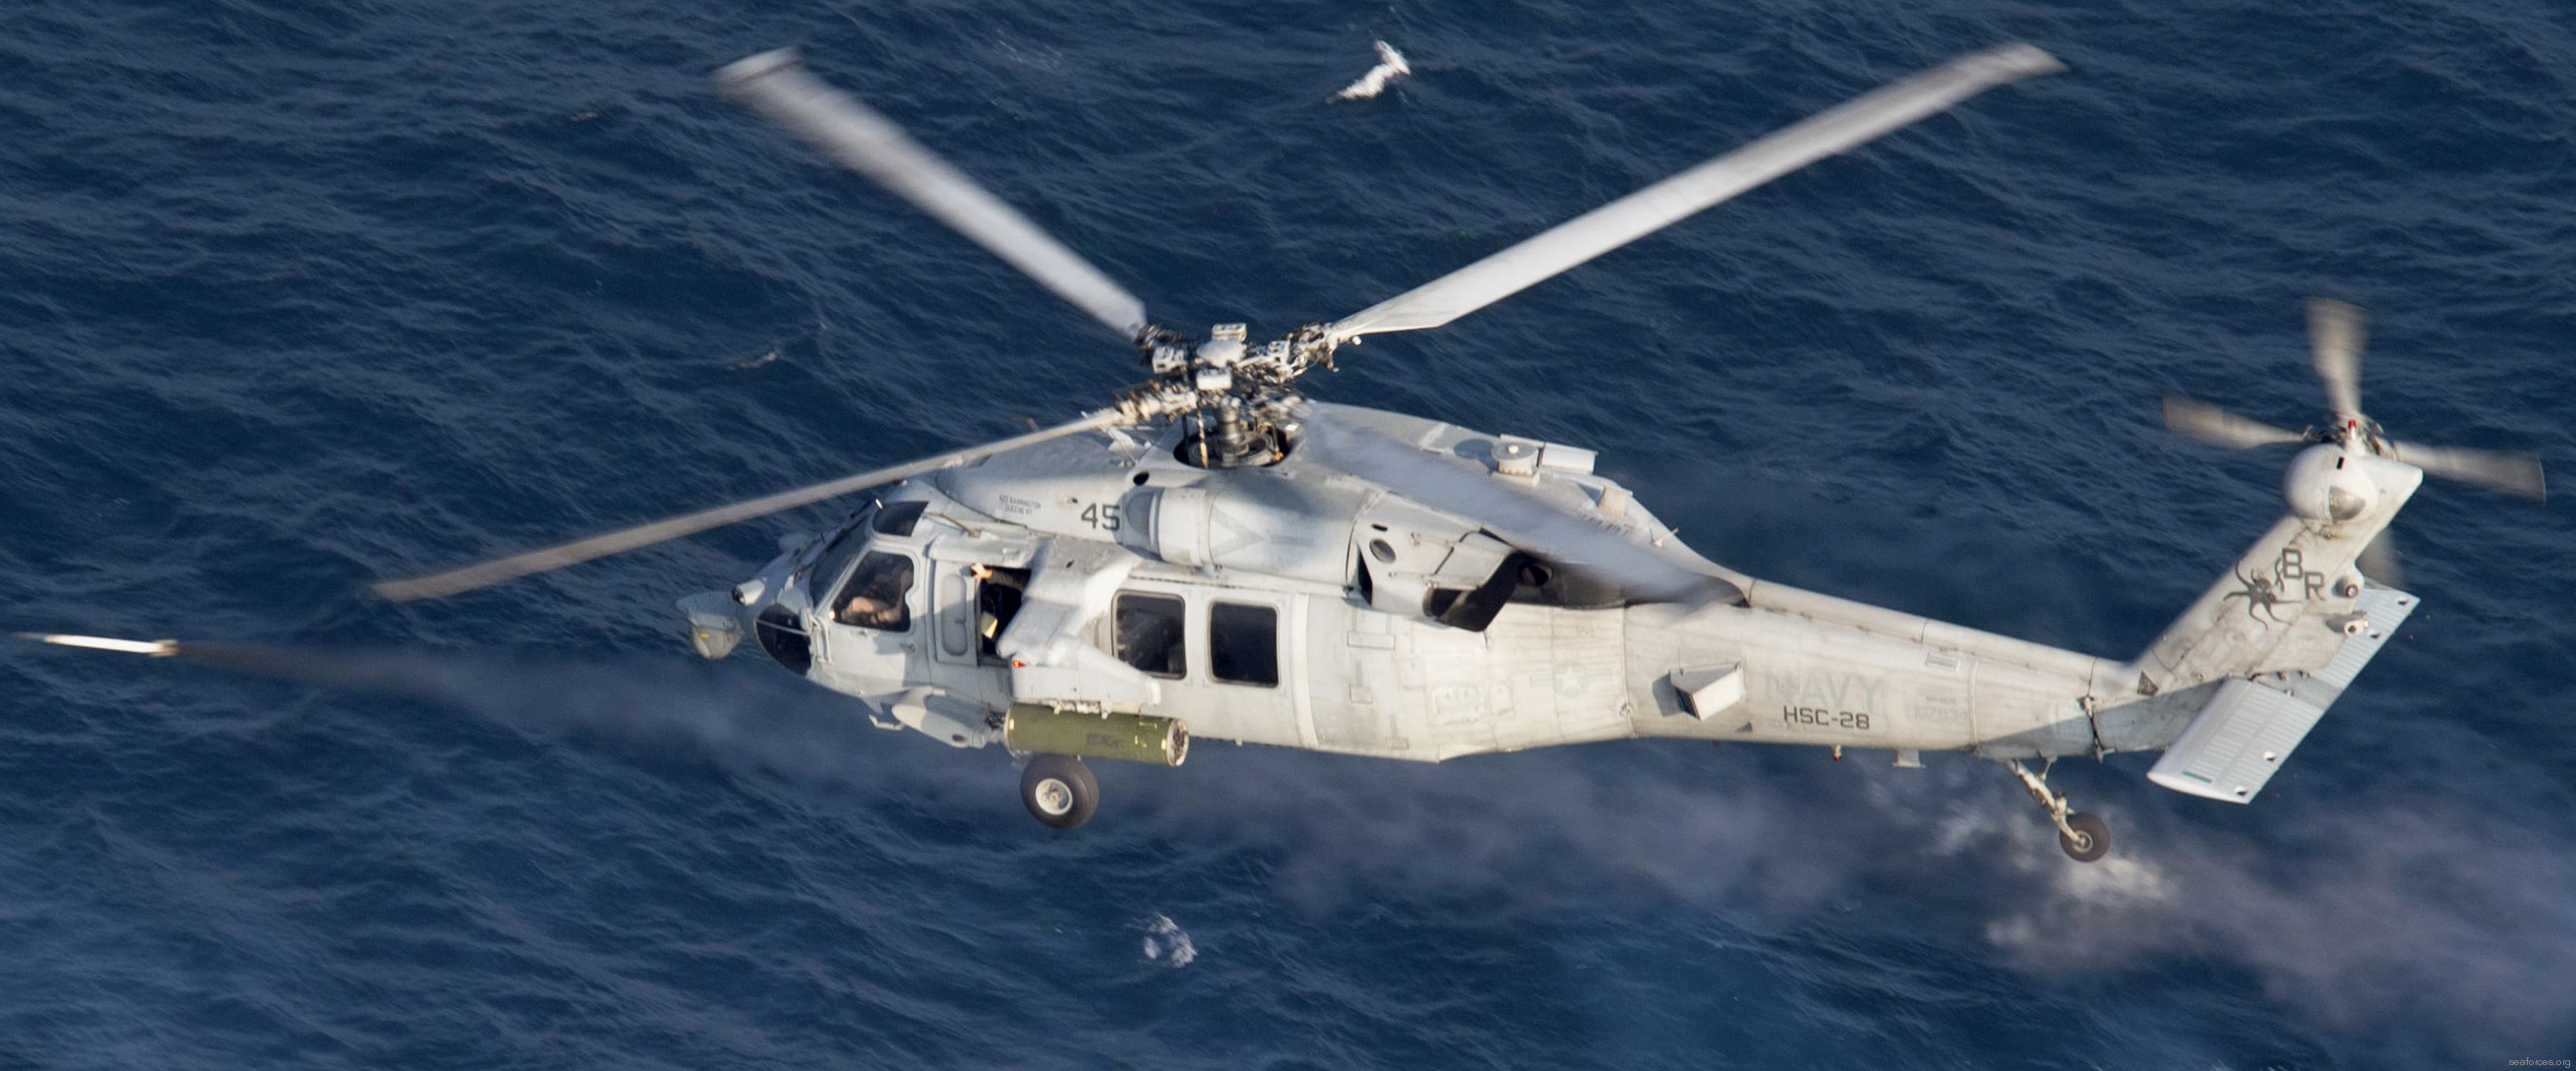 hsc-28 dragon whales helicopter sea combat squadron mh-60s seahawk us navy 235 2.75 inches rocket zuni